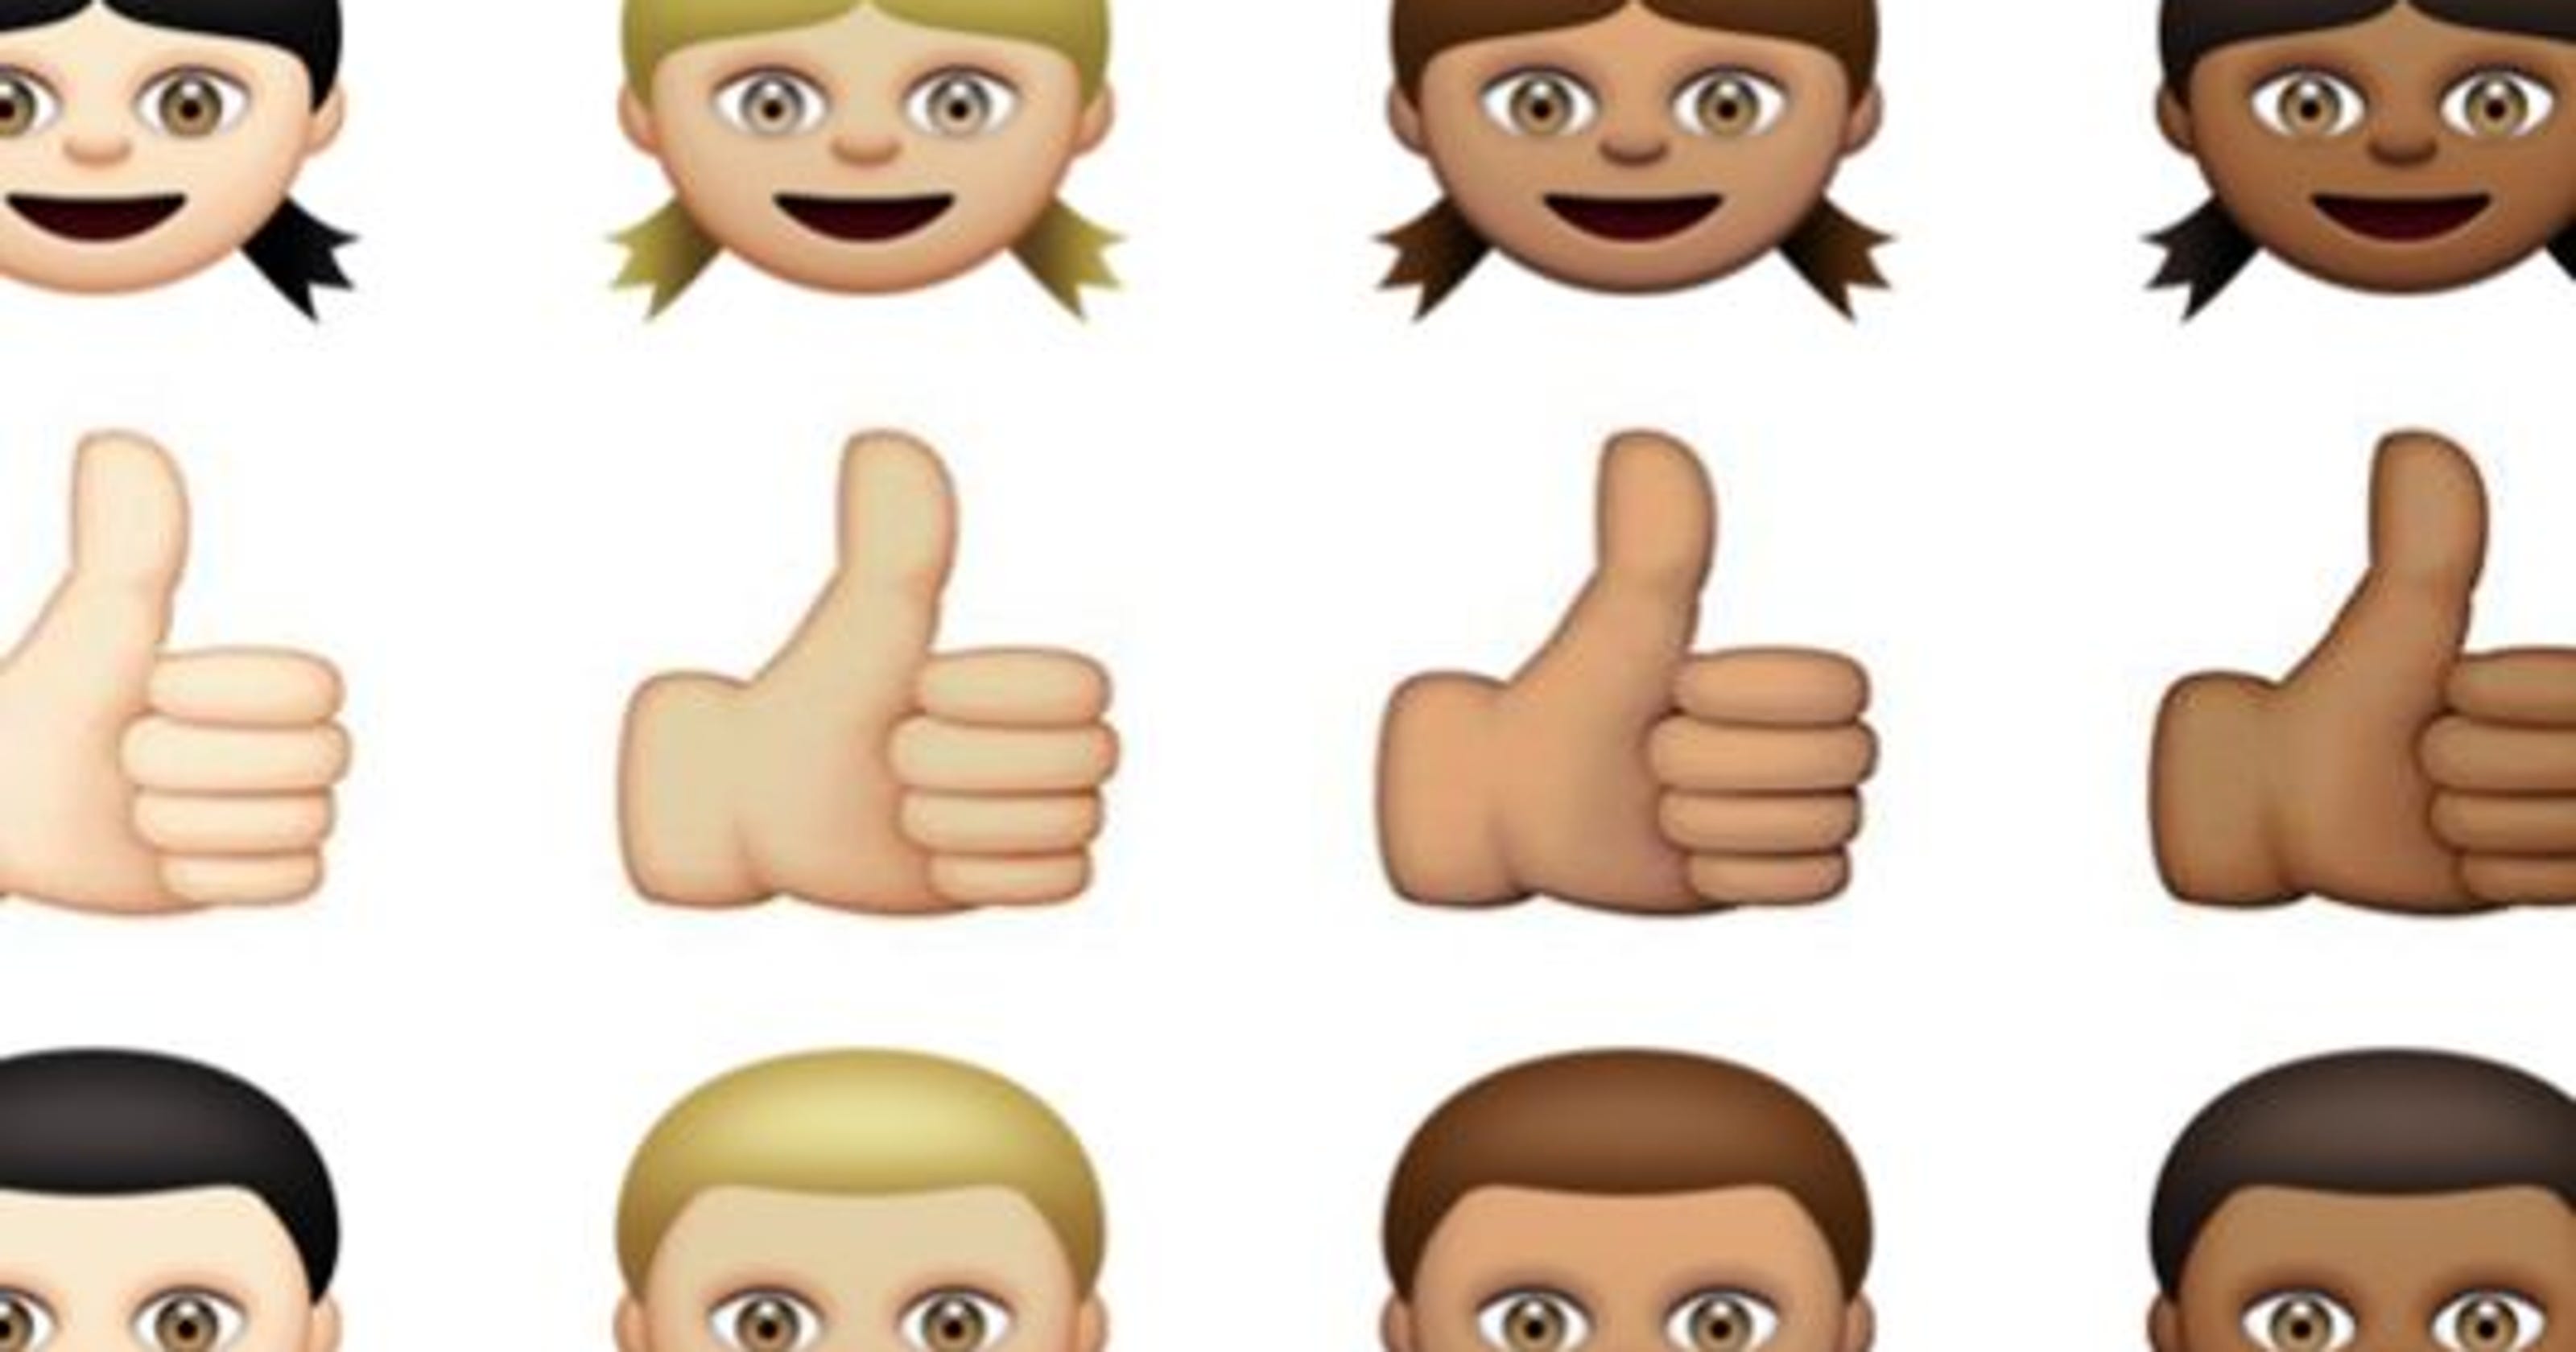 Diverse Thumbs Up Emojis With Different Skin Tones Fi 2360